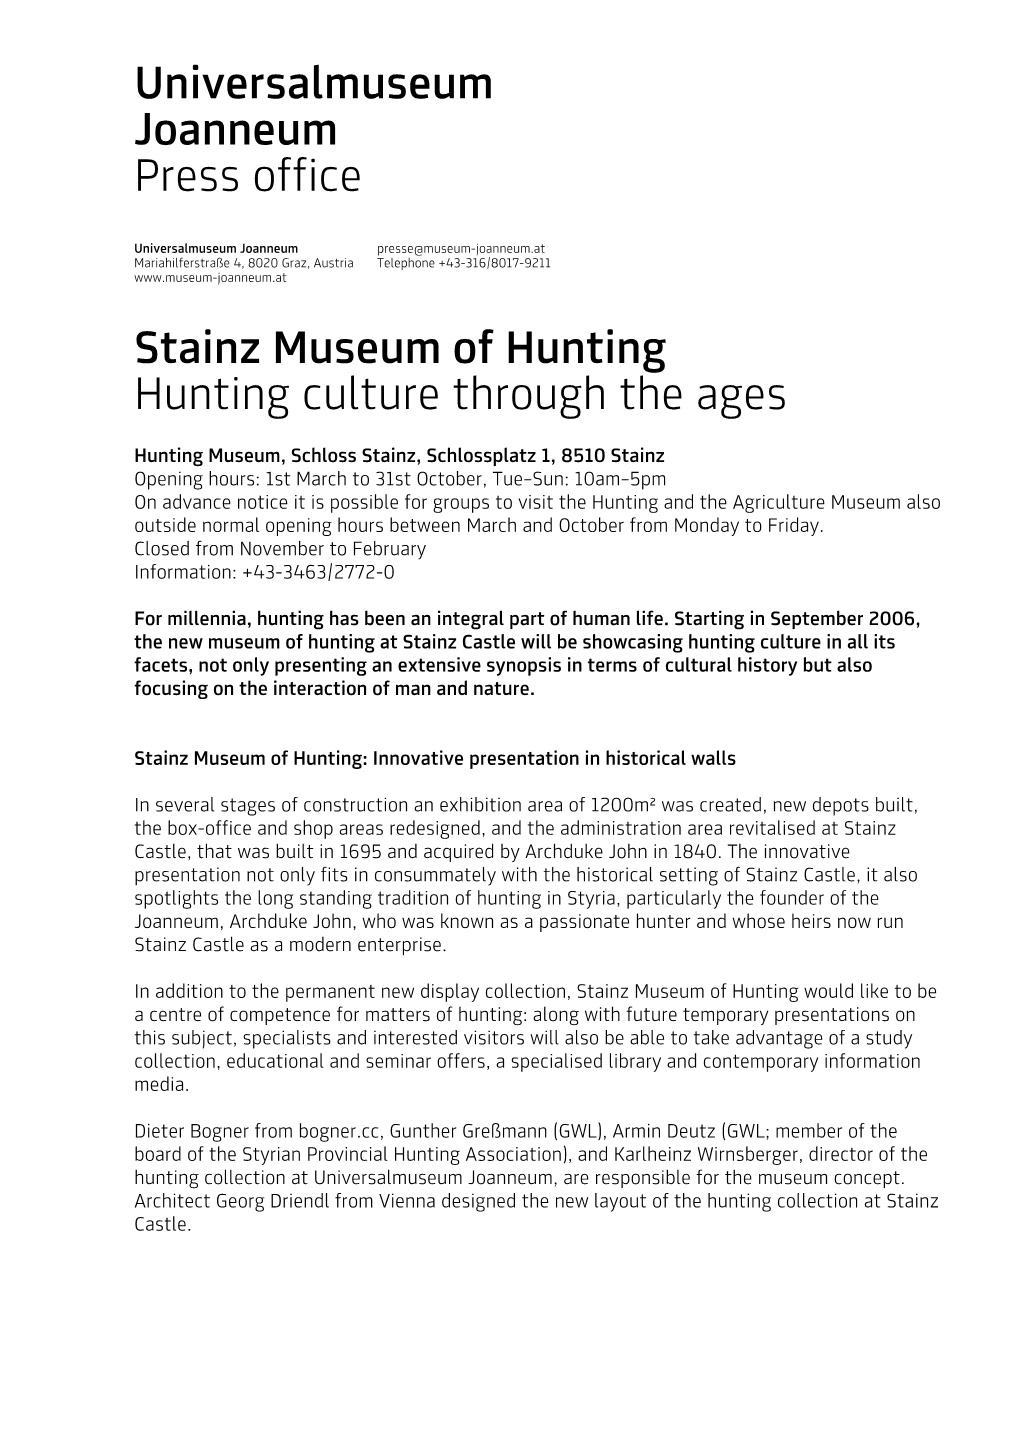 Universalmuseum Joanneum Press Office Stainz Museum of Hunting Hunting Culture Through the Ages